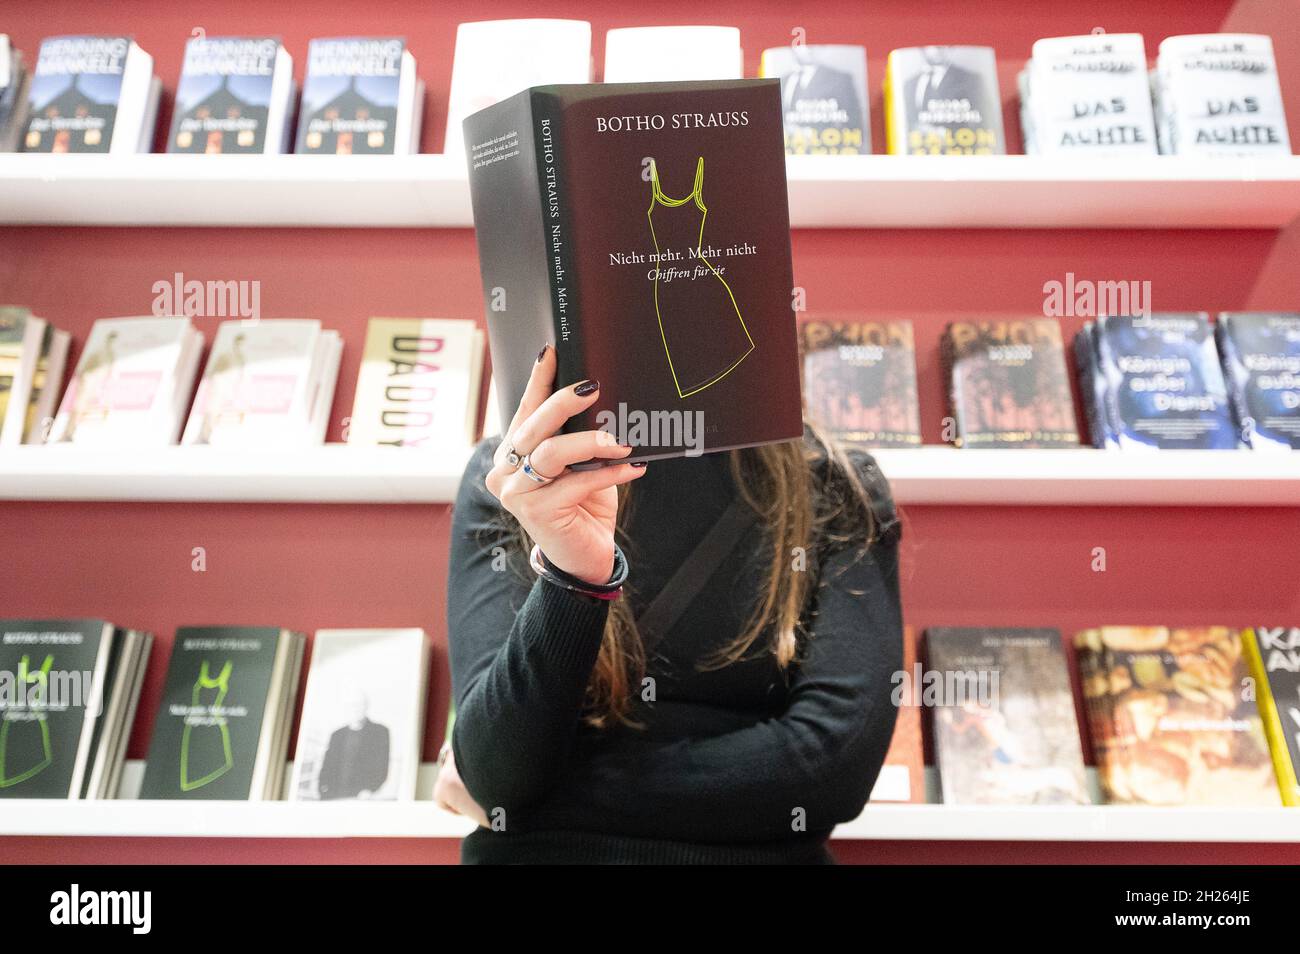 20 October 2021, Hessen, Frankfurt/Main: Frieda reads on the first day for  trade visitors at the Frankfurt Book Fair 2021 at the Carl Hanser Verlag  stand "Nicht mehr. Nothing more: Ciphers for